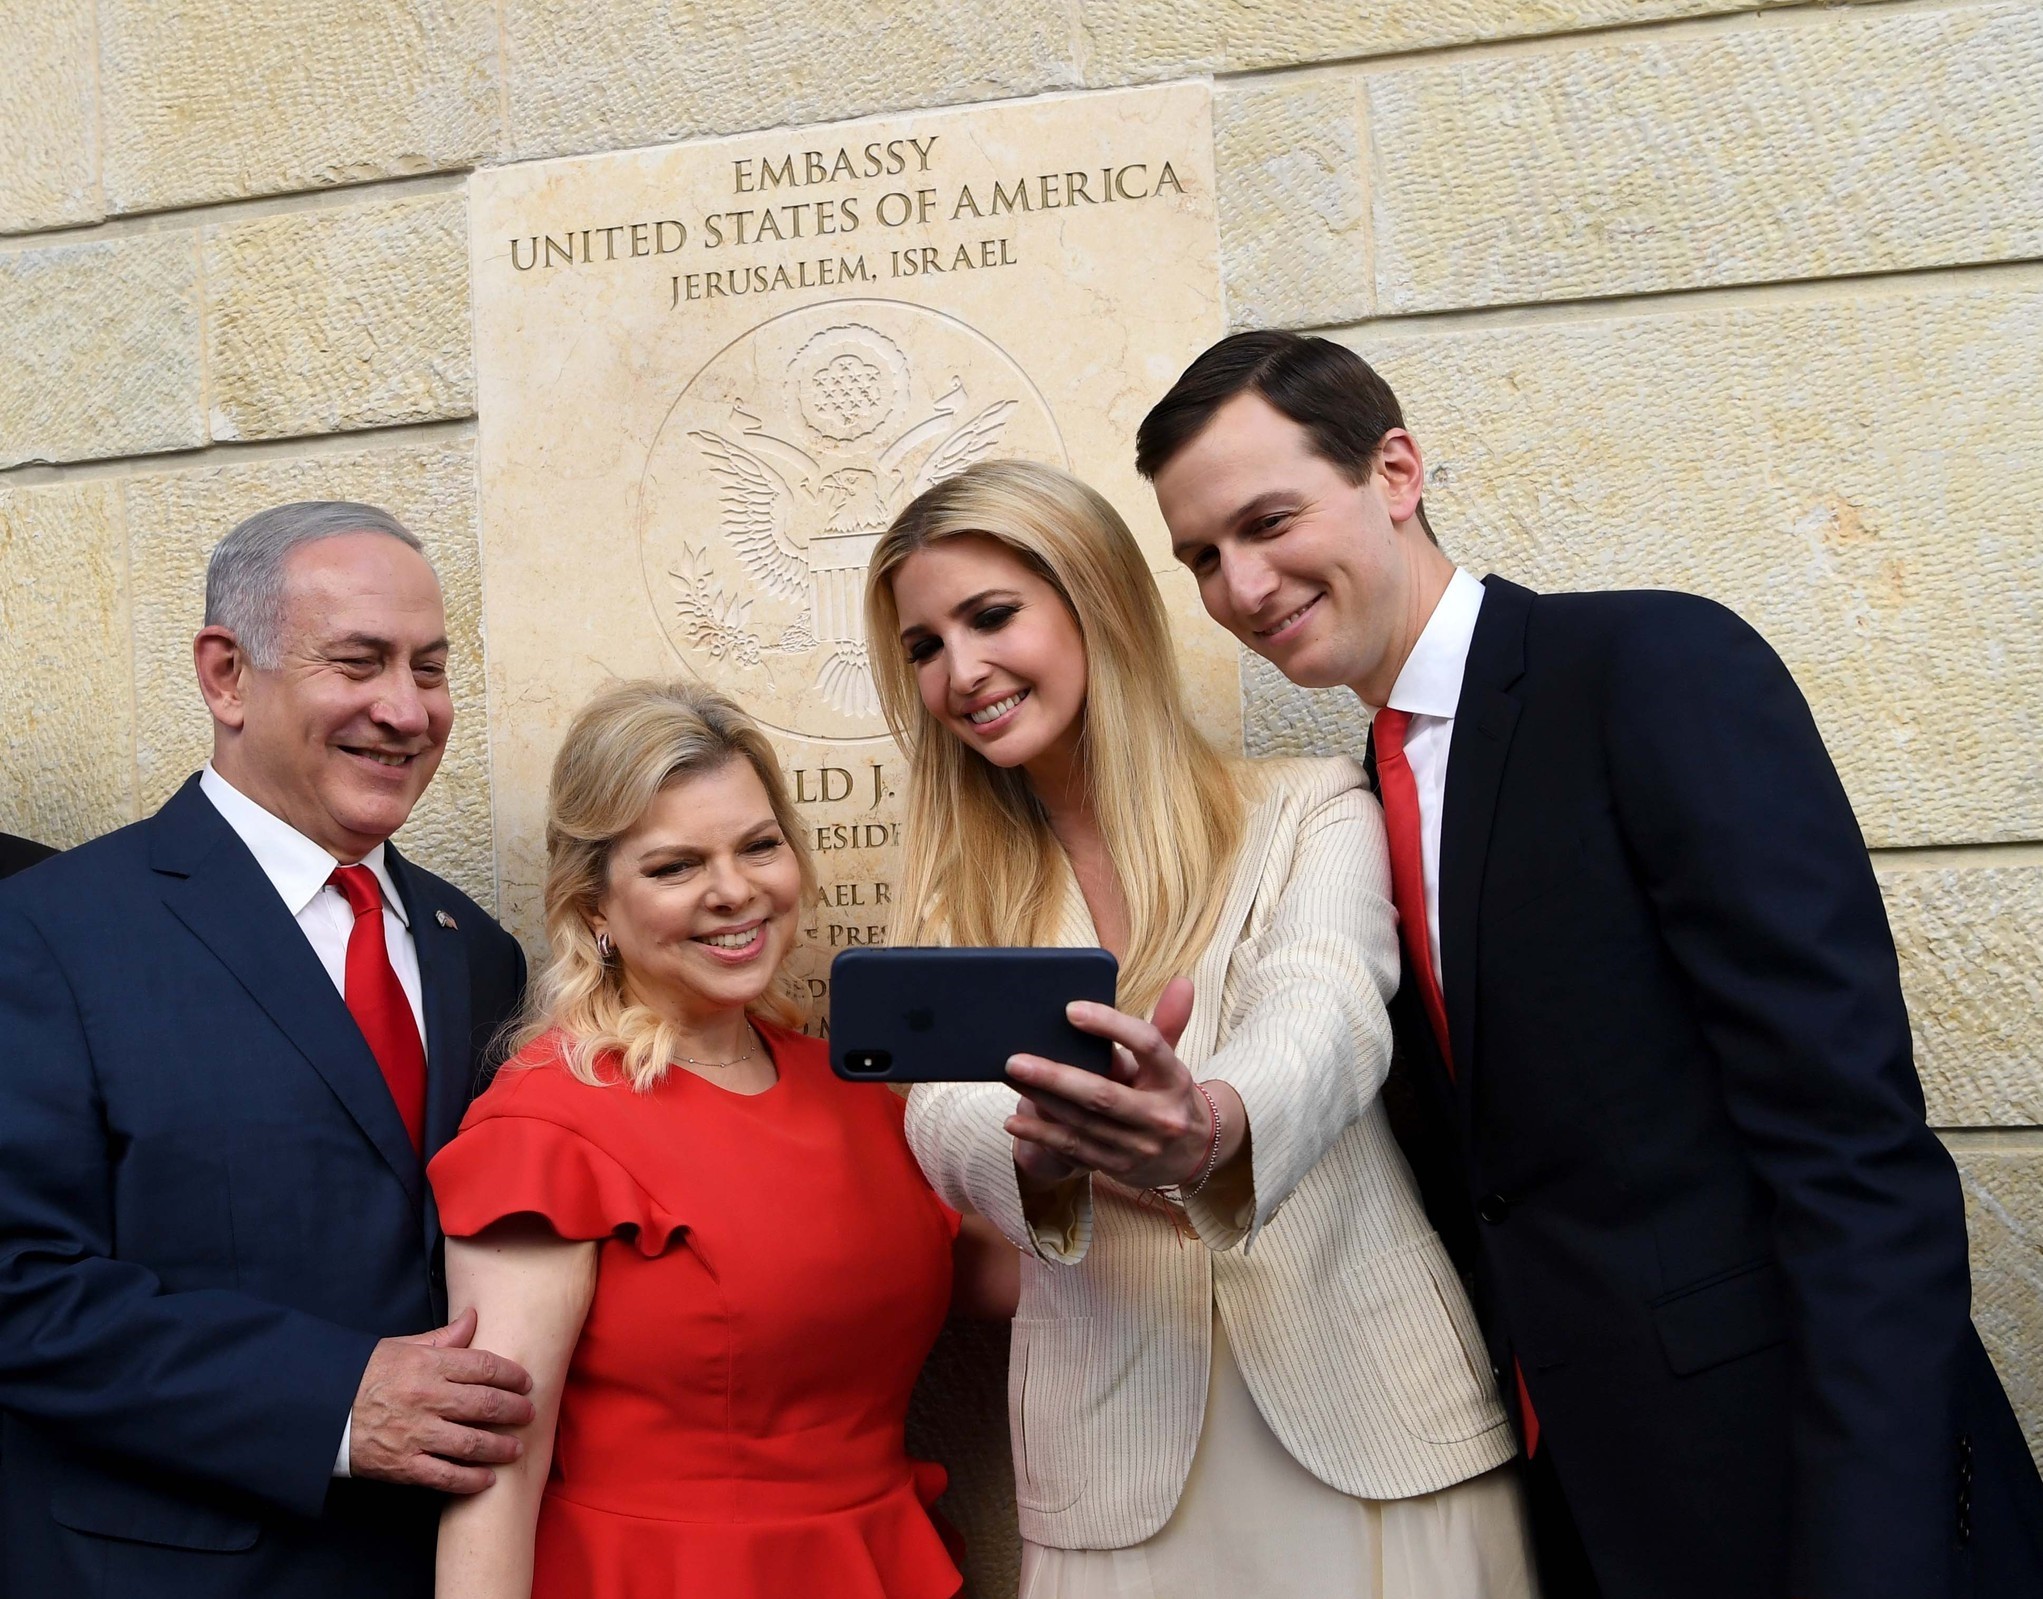 Israeli Prime Minister Benjamin Netanyahu with his wife Sara and the daughter and the son-in-law of the U.S. president, Ivanka Trump and Jared Kushner, take a selfie during the opening of the U.S. Embassy in Jerusalem.